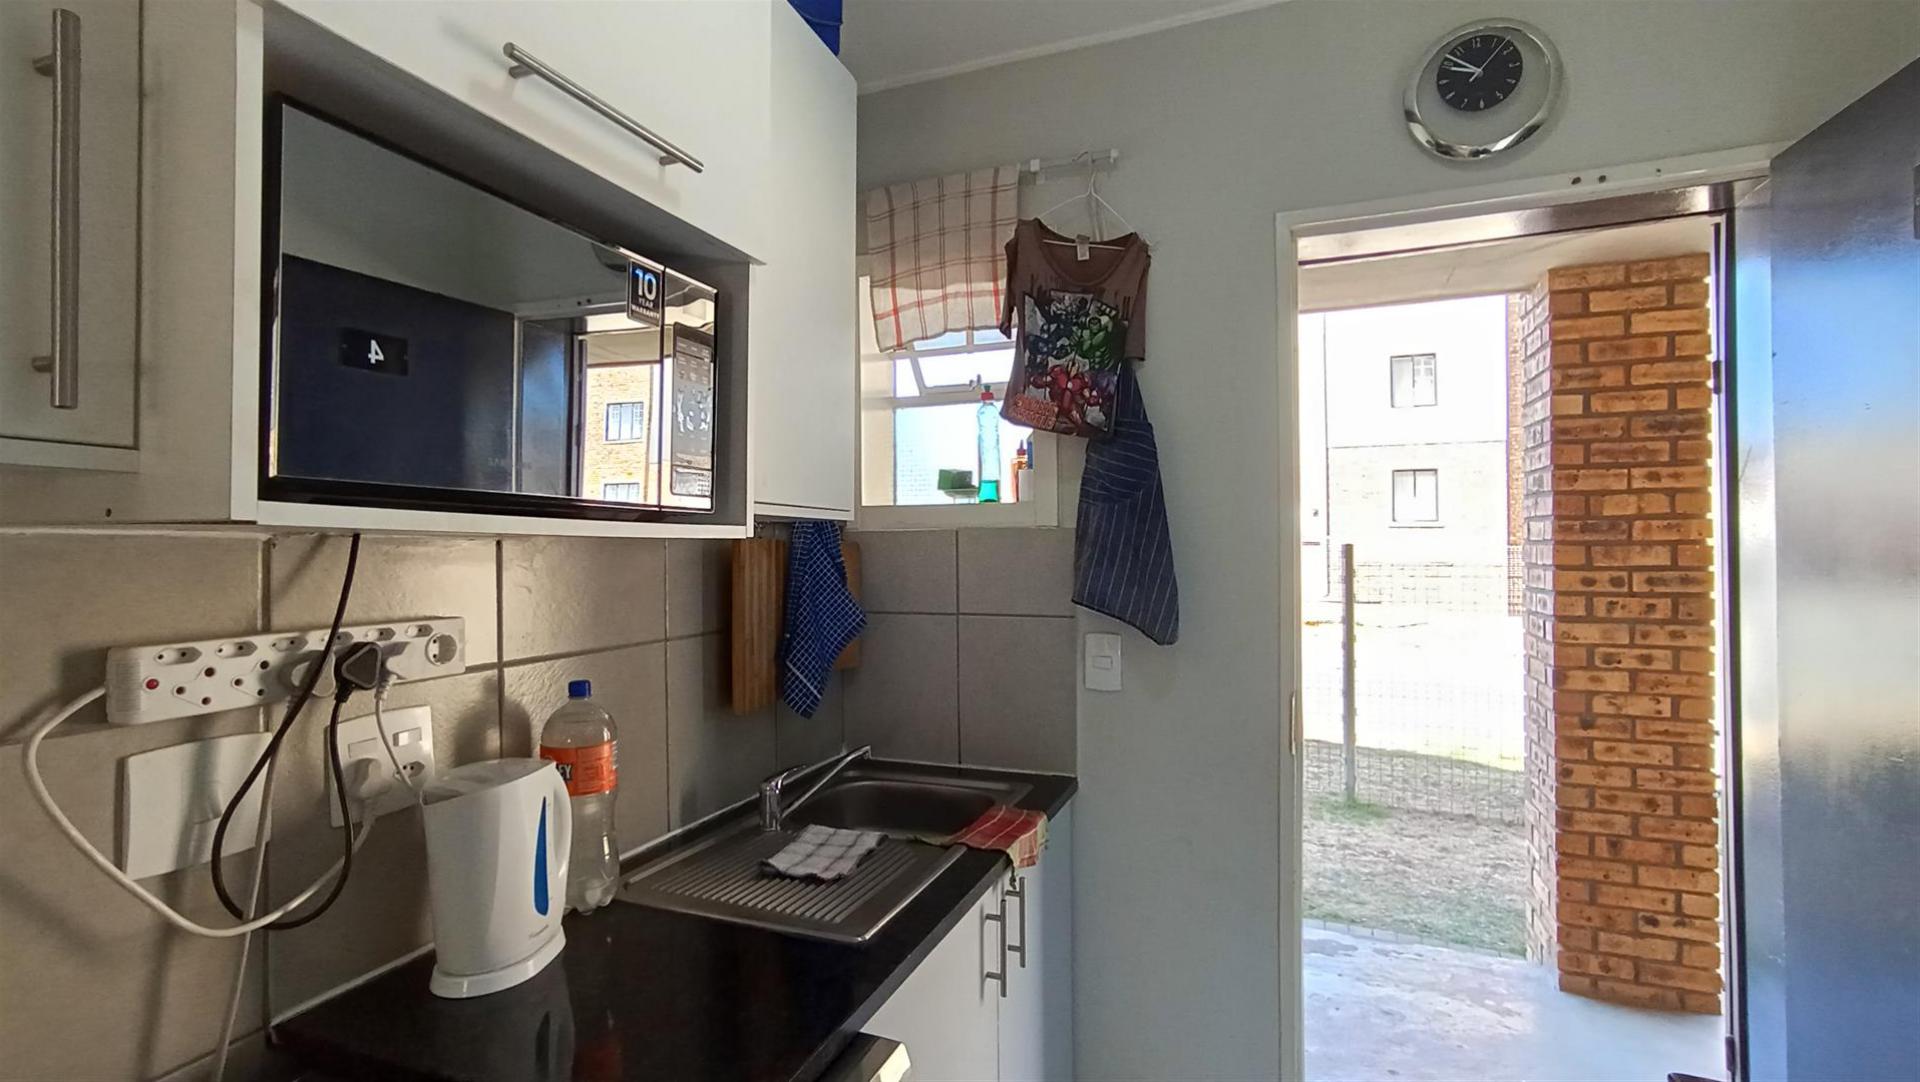 Kitchen - 5 square meters of property in South Hills